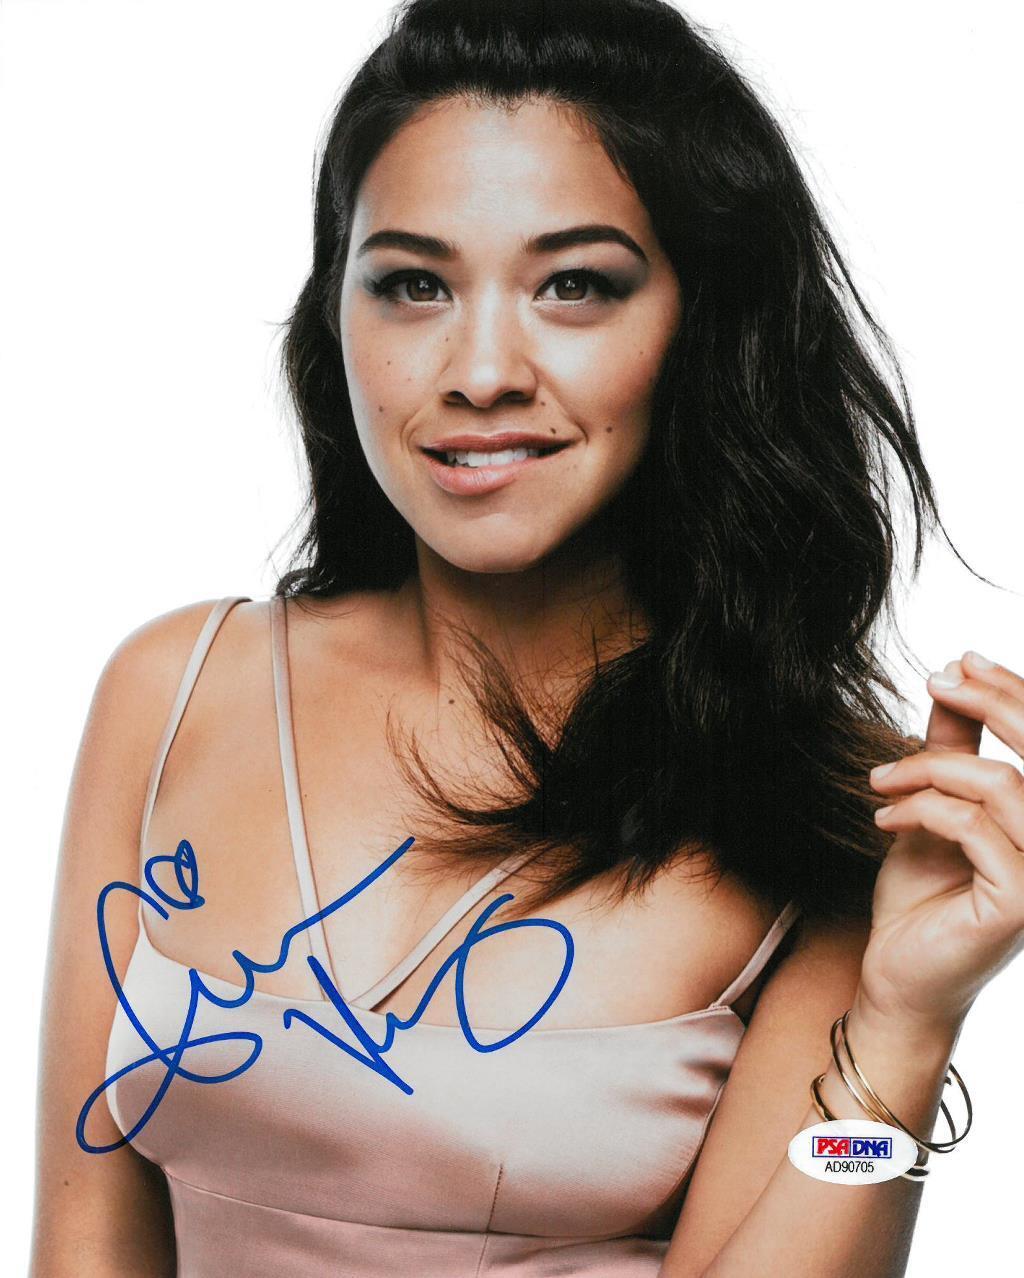 Gina Rodriguez Signed Authentic Autographed 8x10 Photo Poster painting PSA/DNA #AD90705